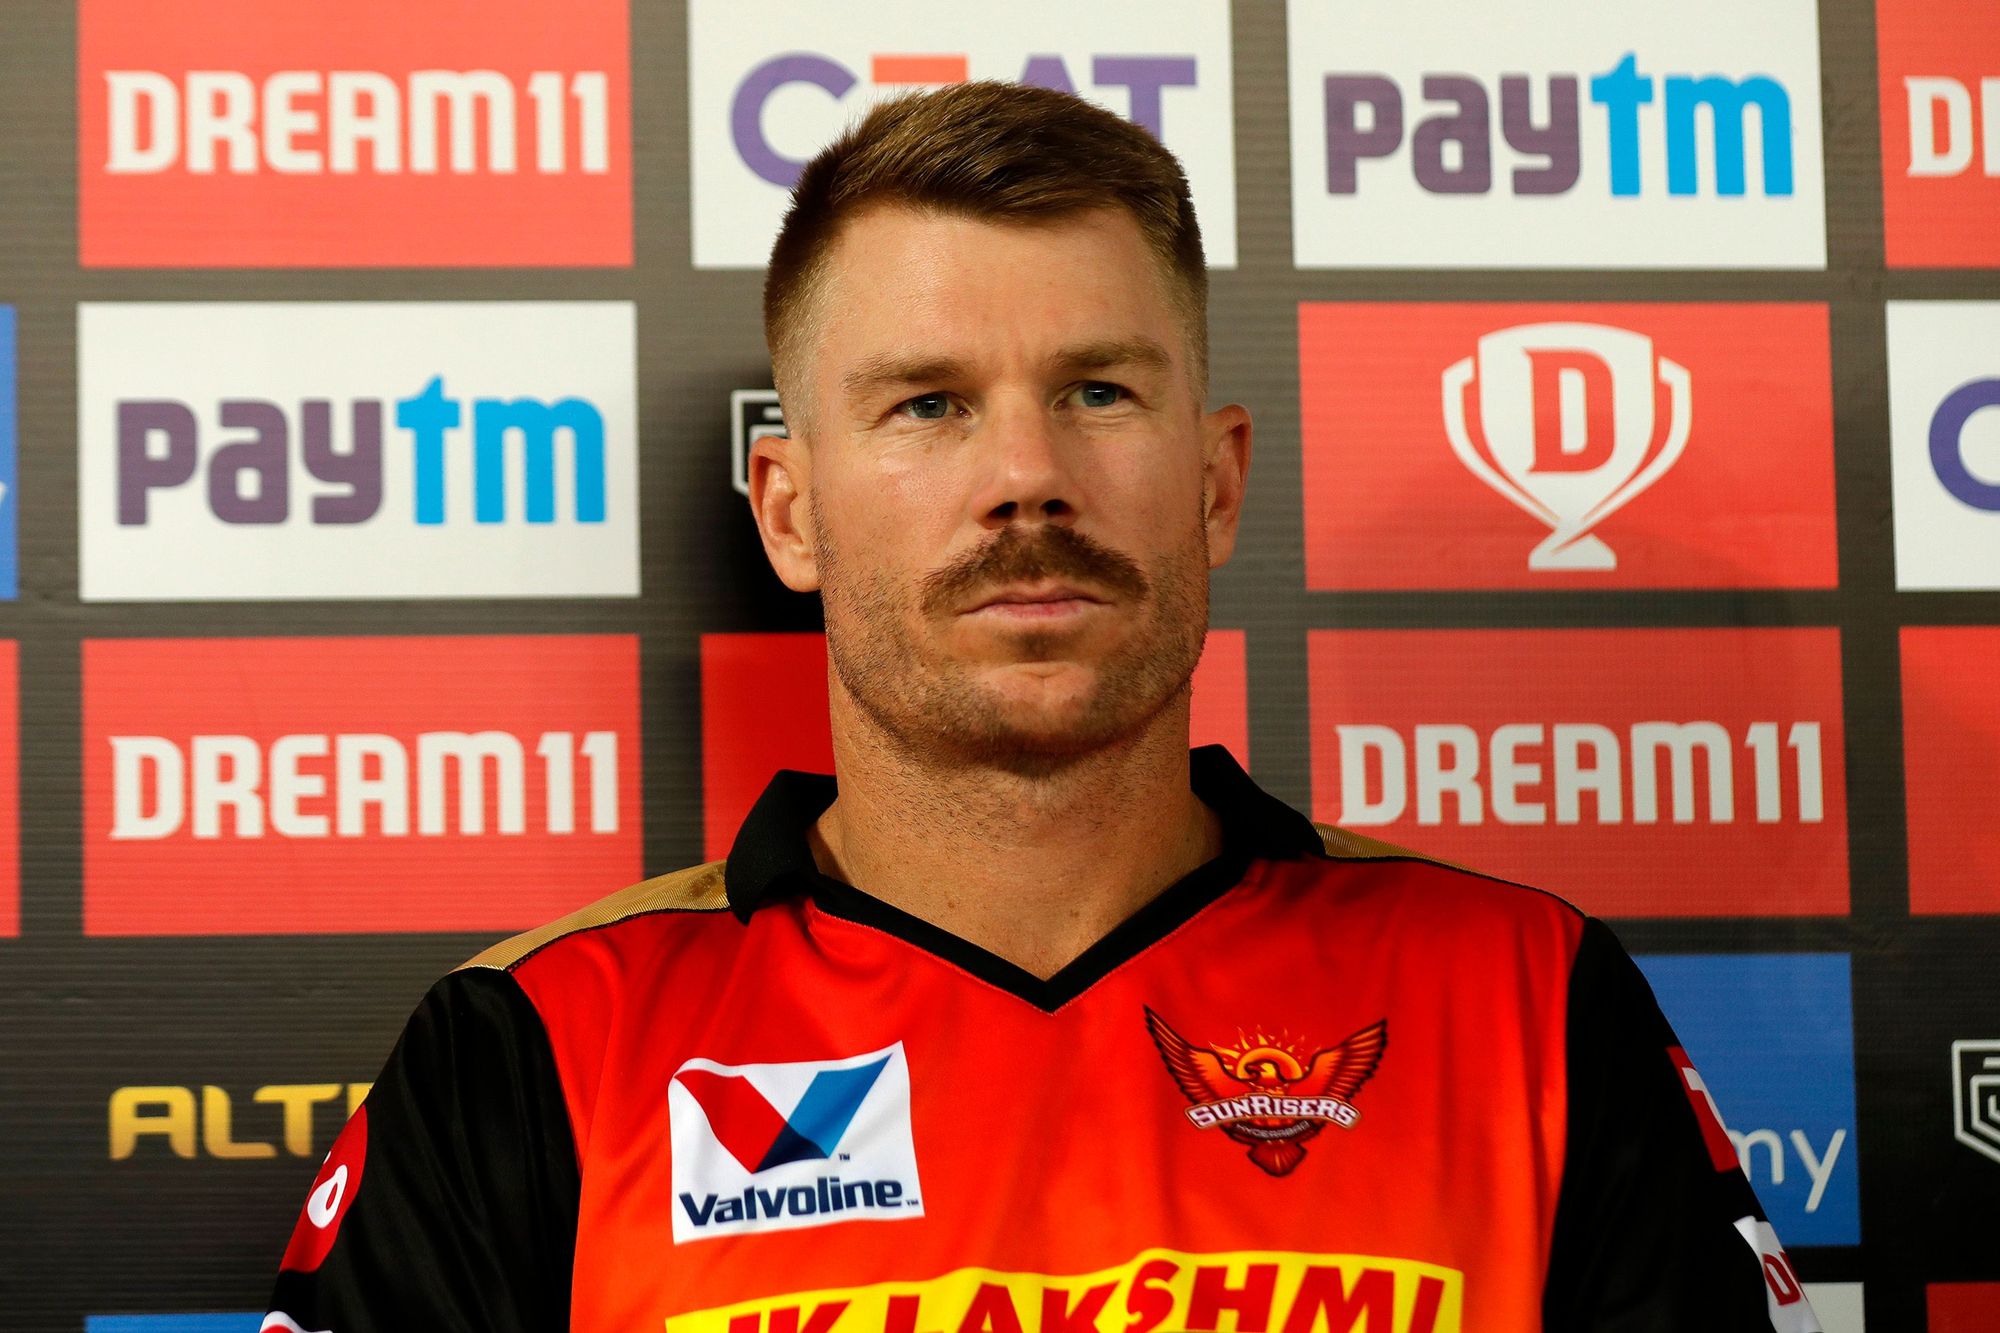 Wouldn’t be surprised if David Warner ends up at RCB, says Brad Hogg